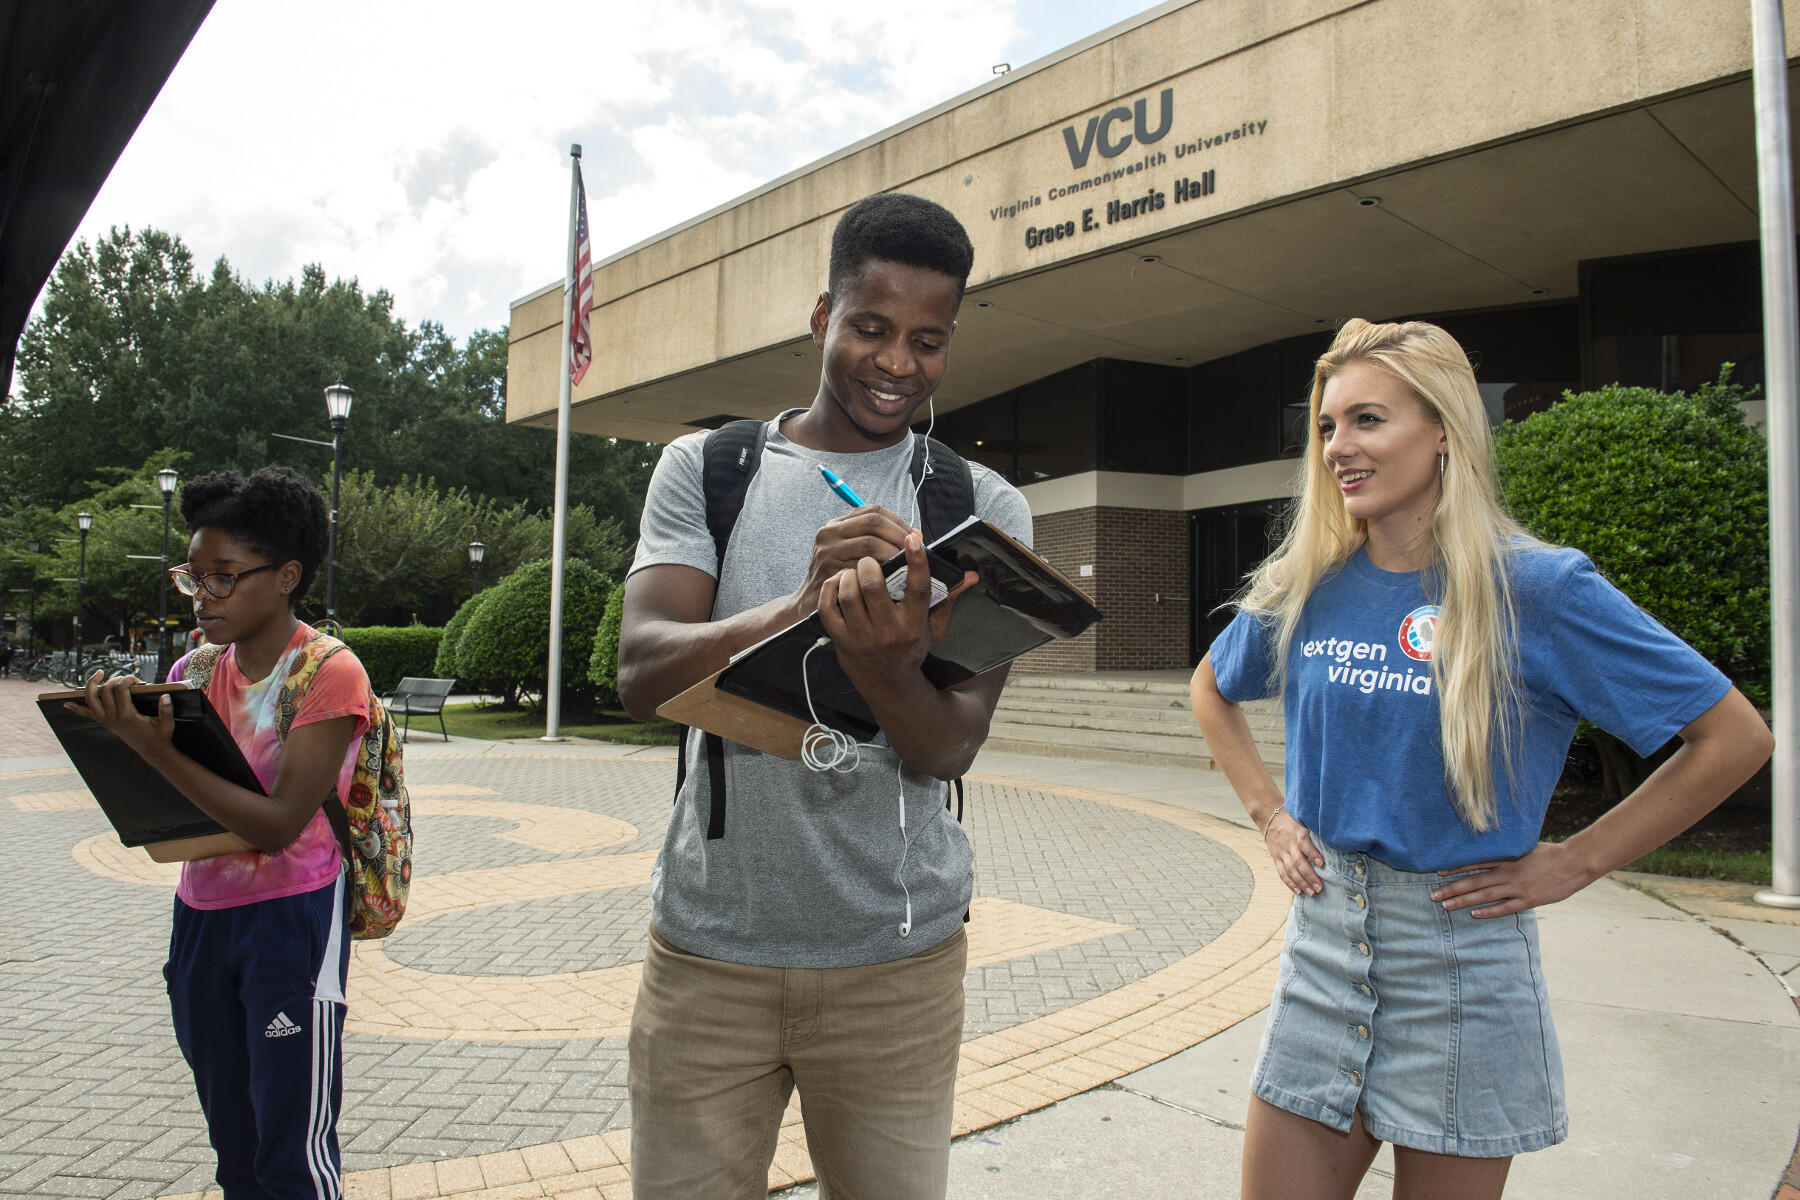 A woman in a pink shirt and a man in a grey shirt sign papers on clipboards next to Grace E. Harris Hall, while a woman in blue T-shirt with "nextgen Virginia" written on it watches.